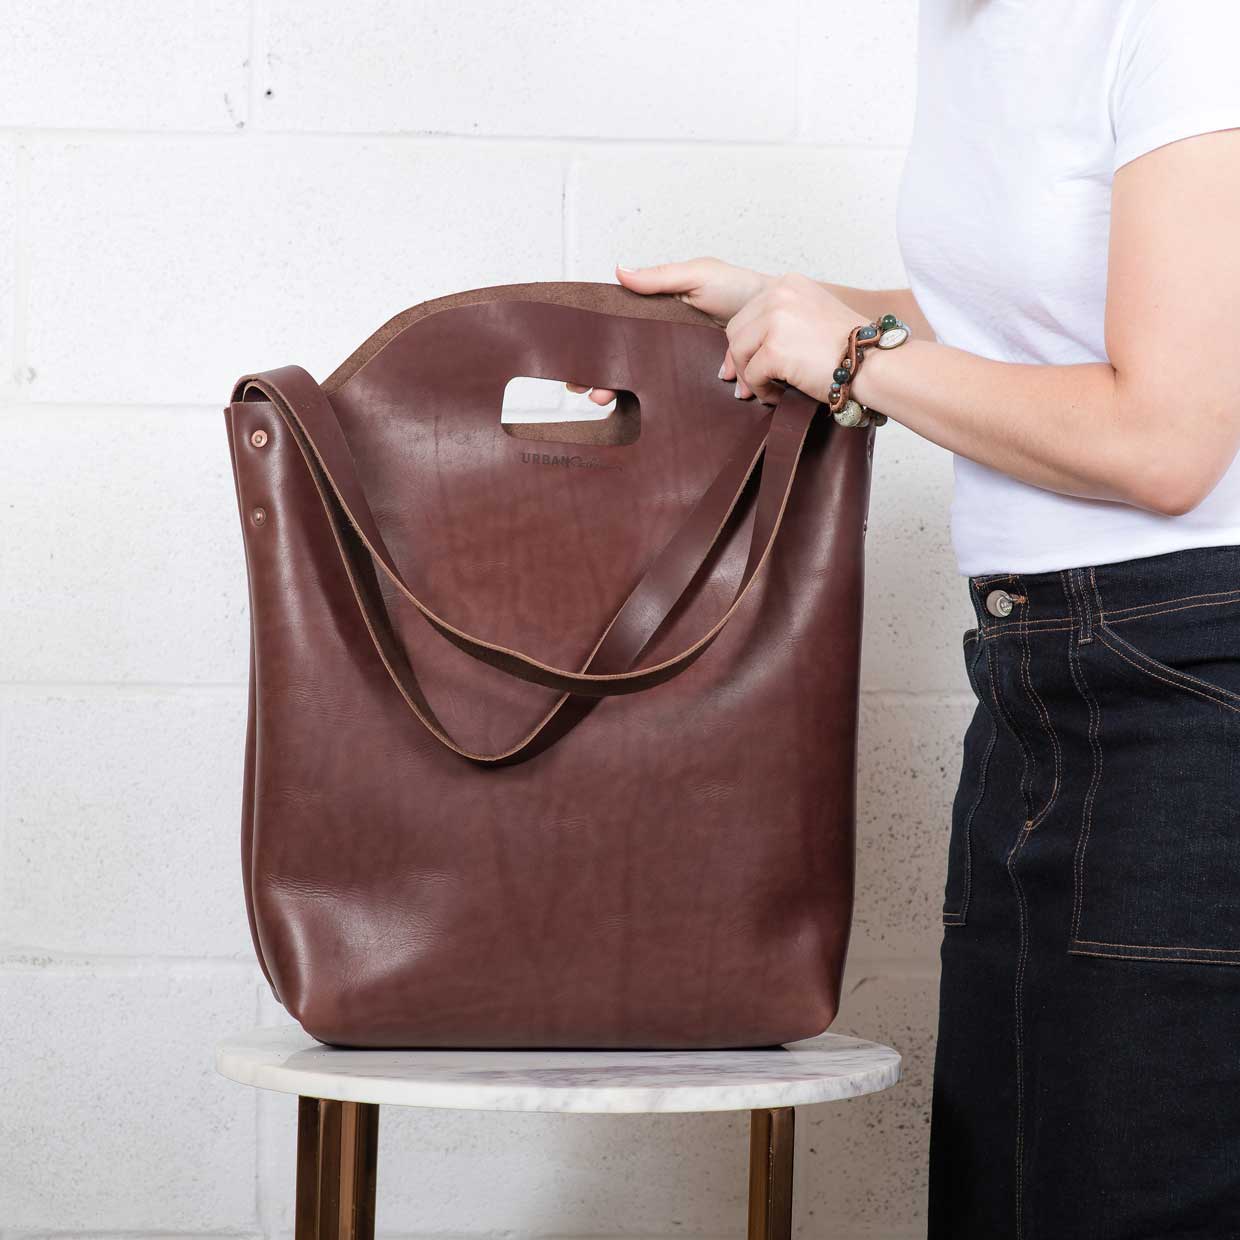 Leather Market Tote